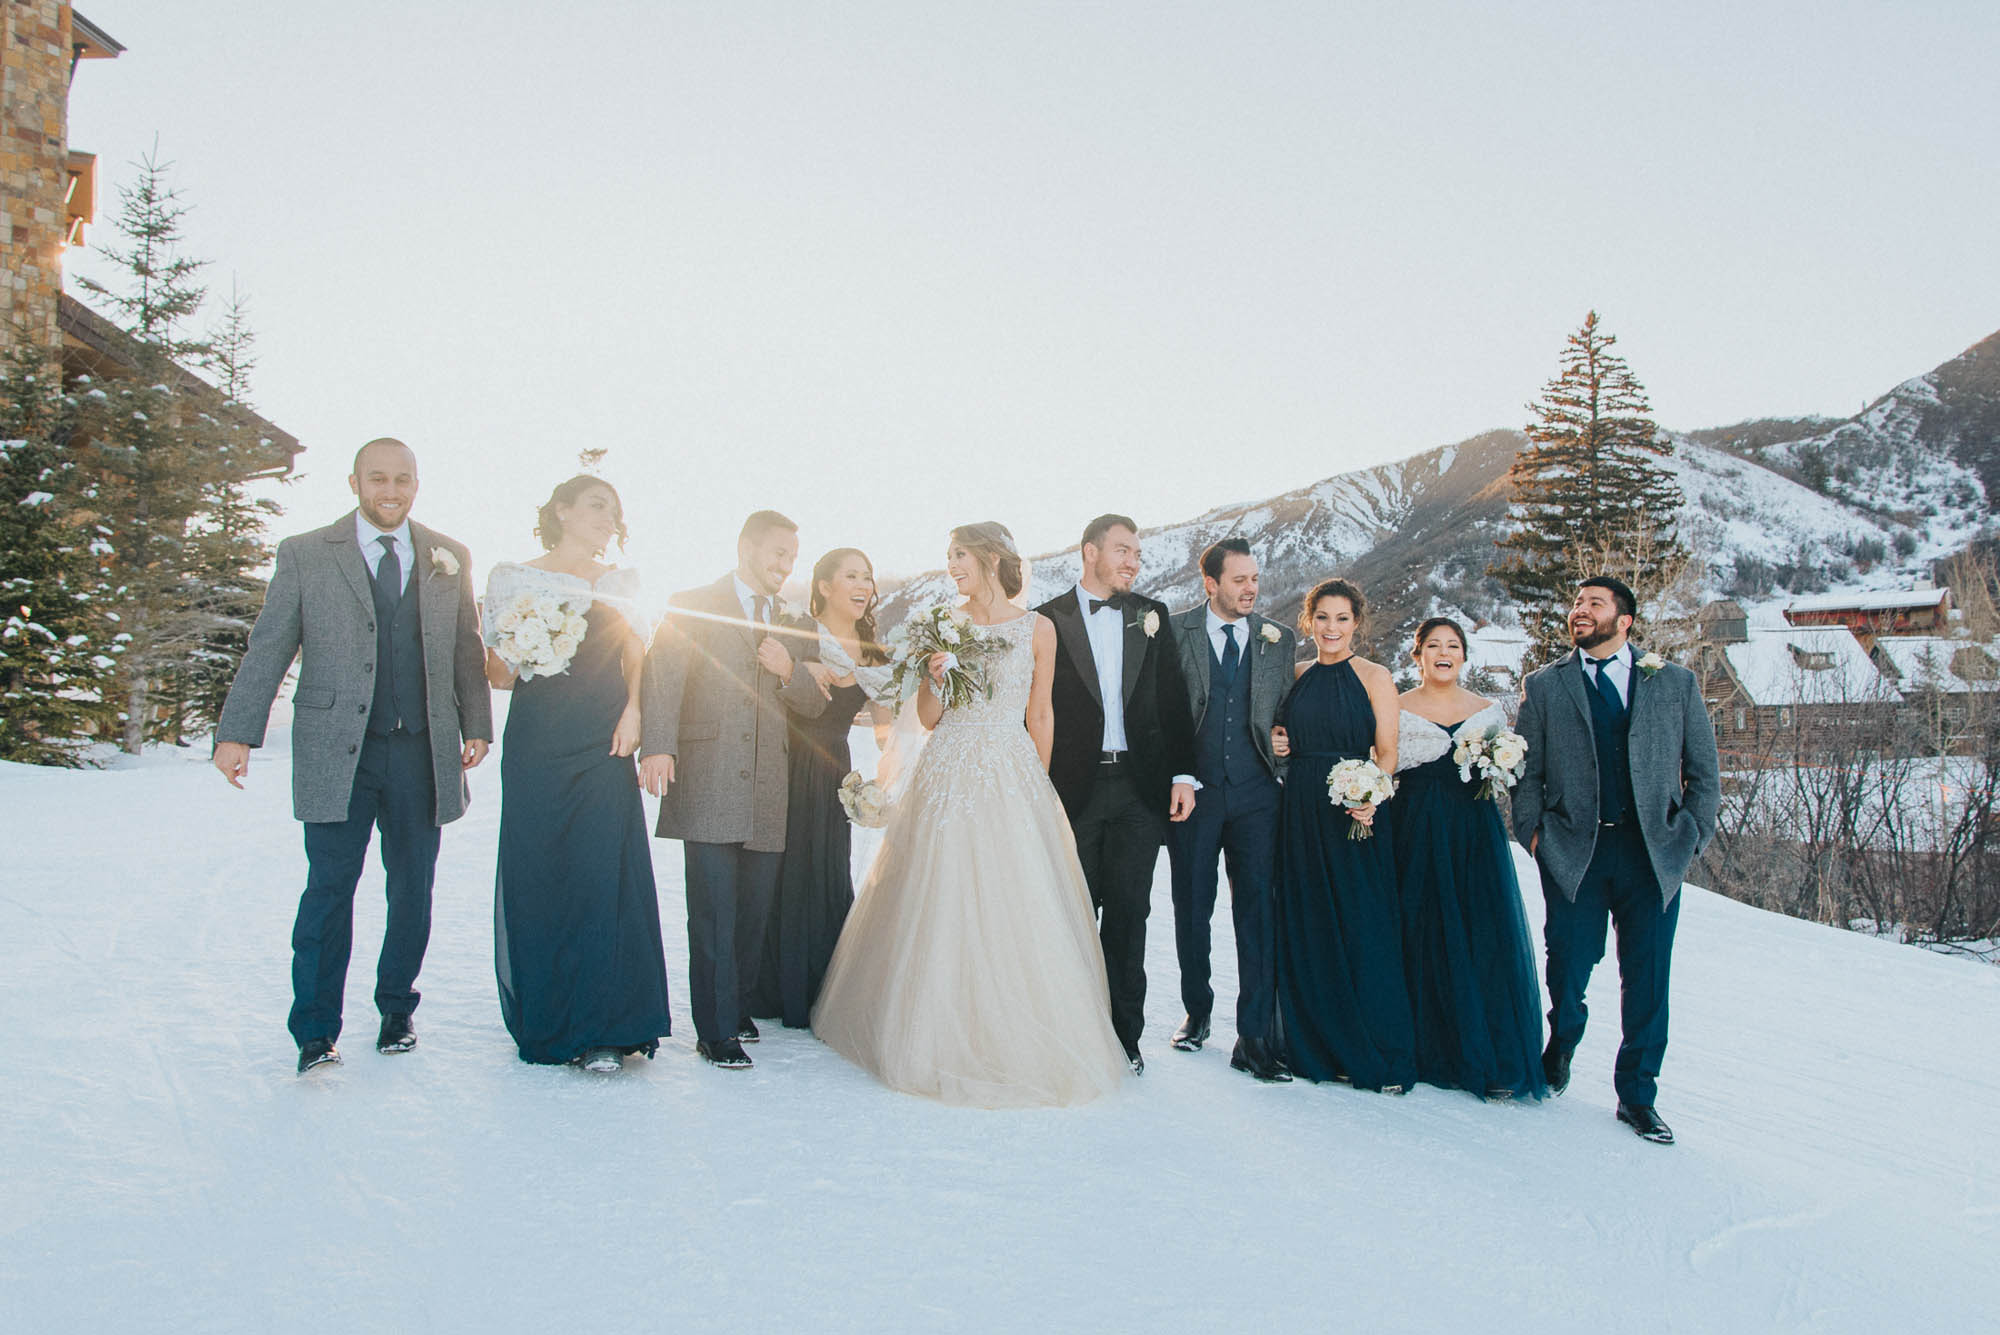 Wedding party portait under ski lift at Viceroy Snowmass